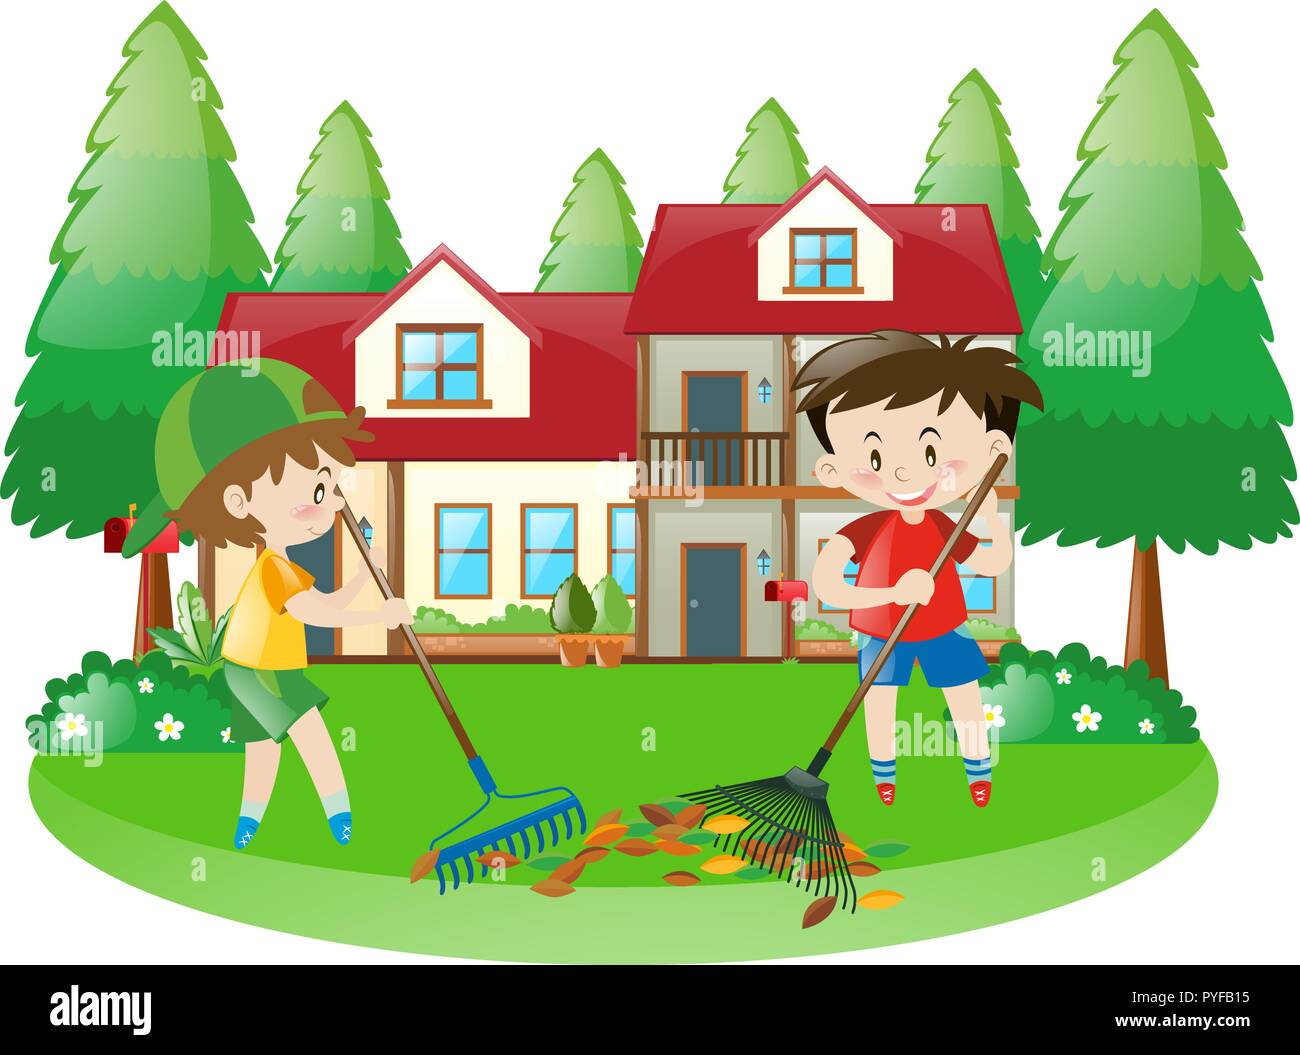 Scene with two boys raking dried leaves illustration Stock Vector